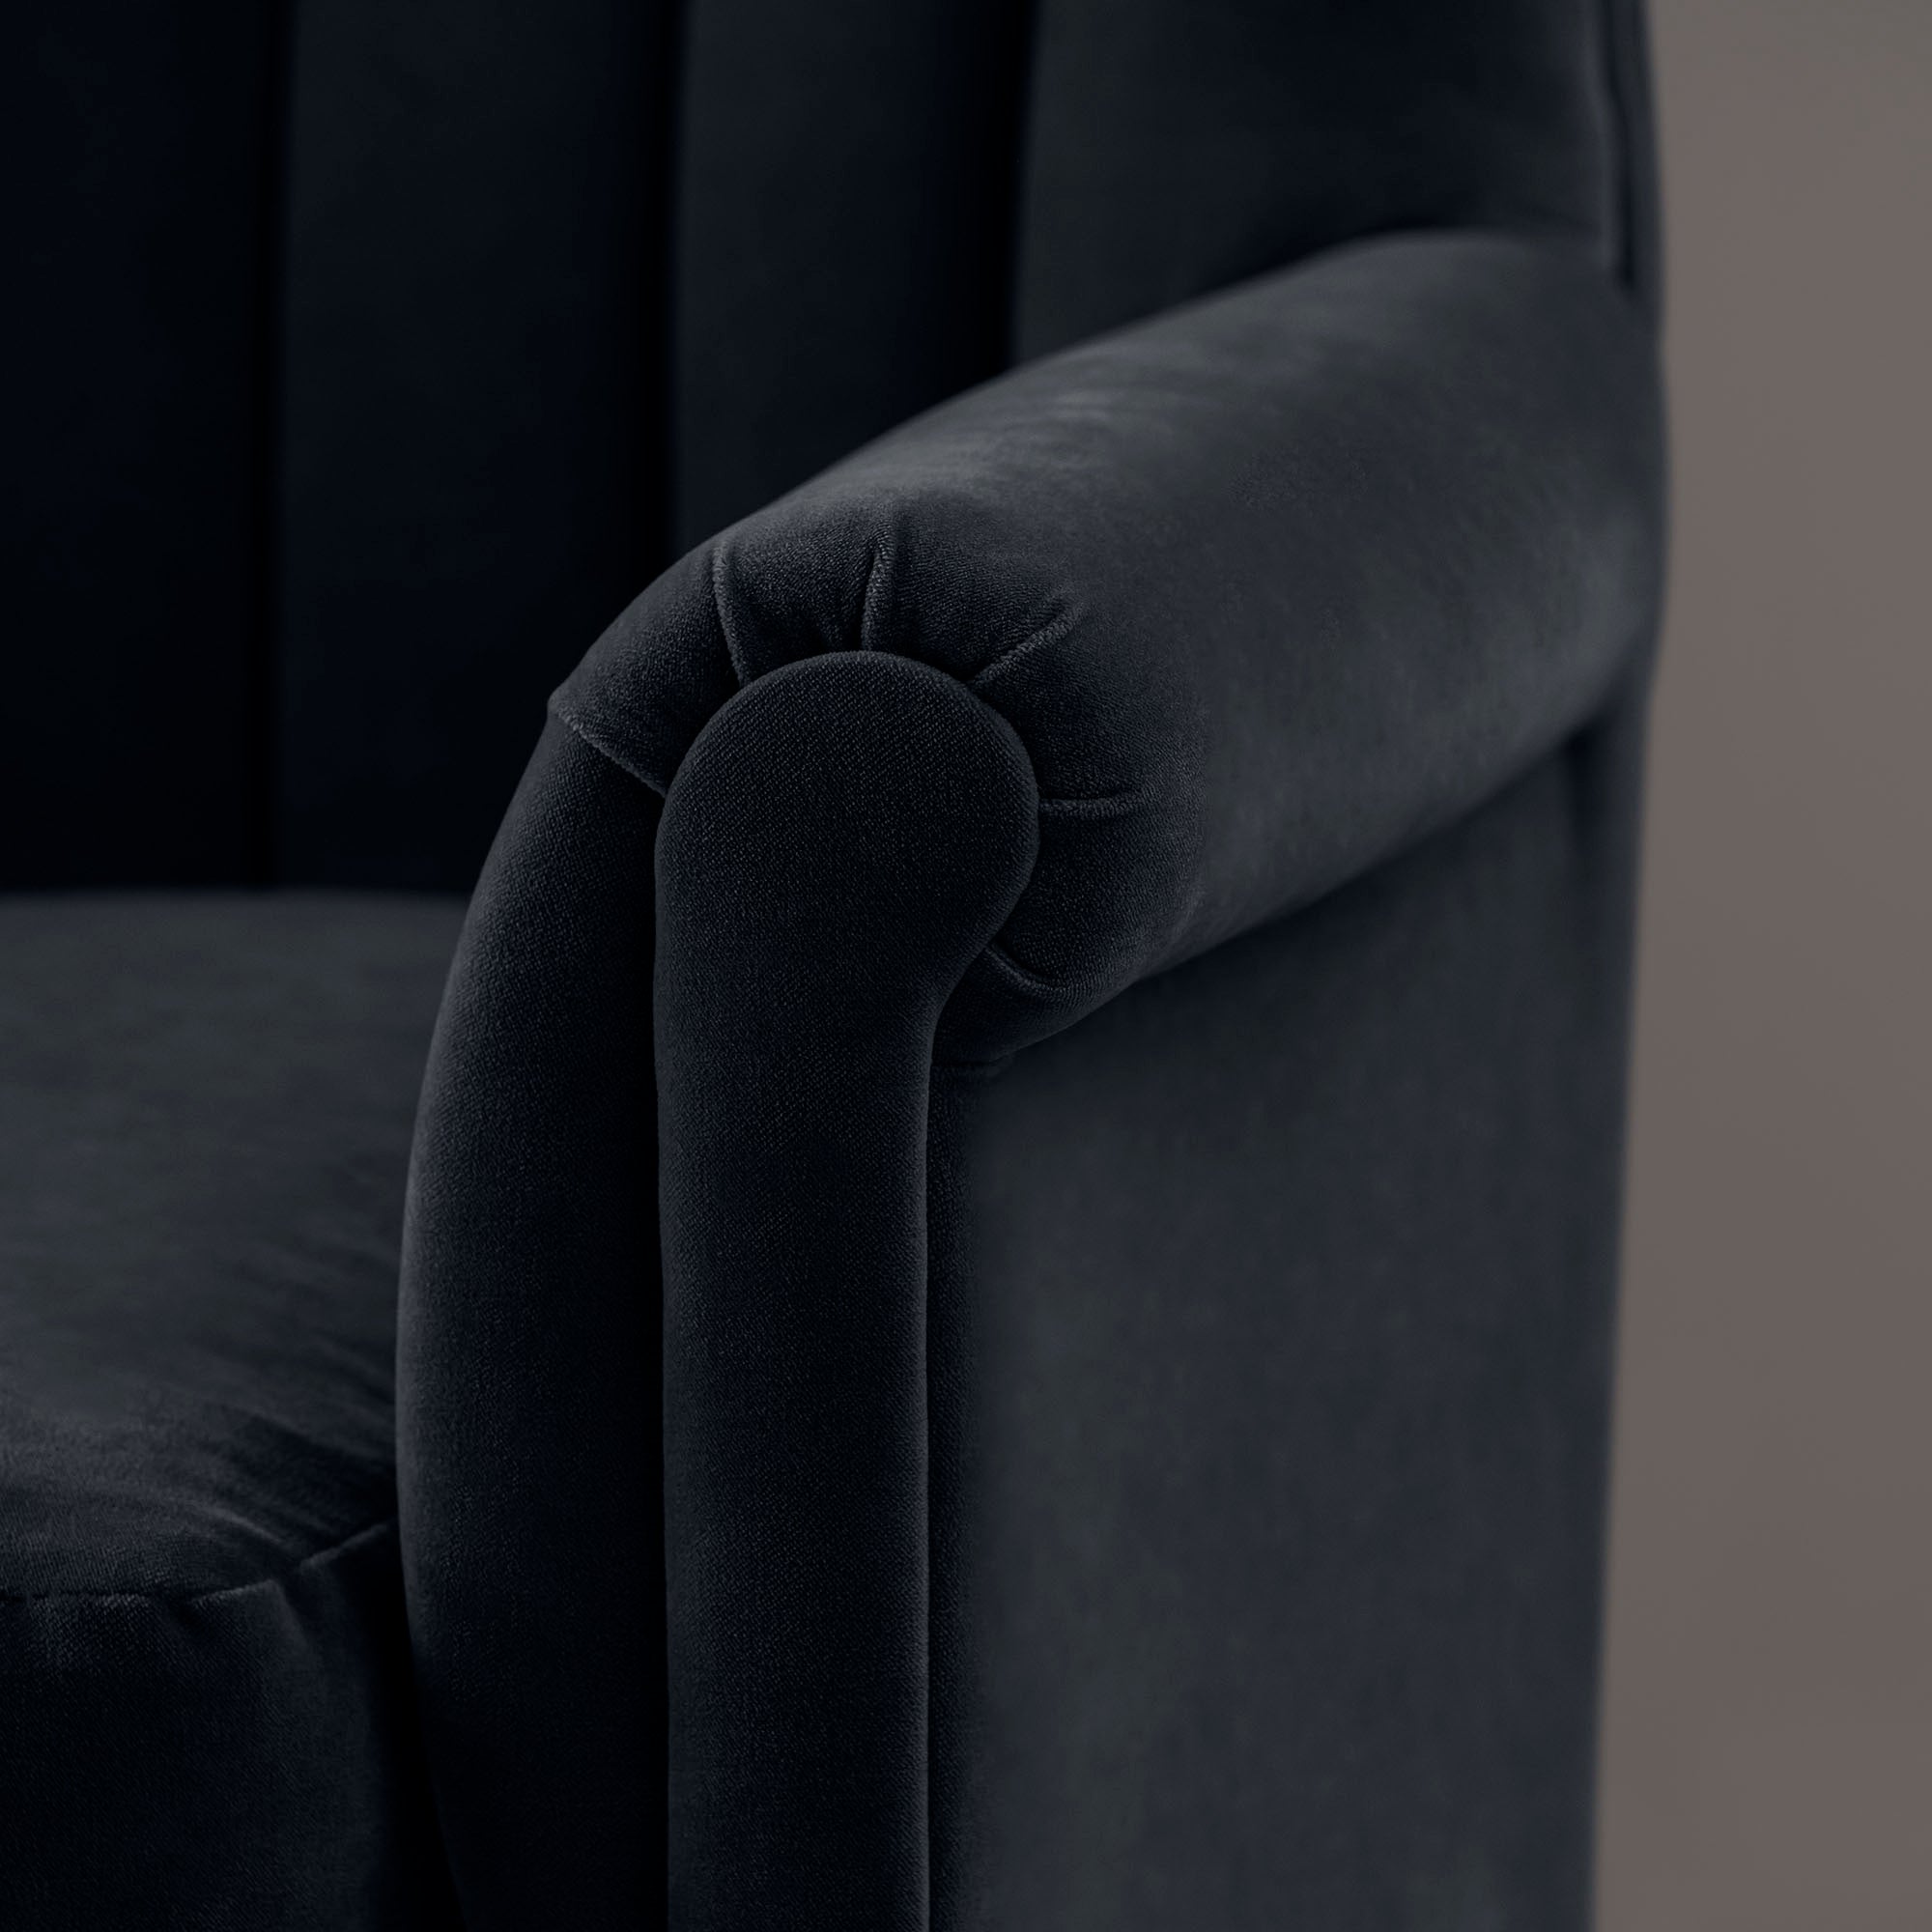  Time Out Armchair in Intelligent Velvet Onyx 